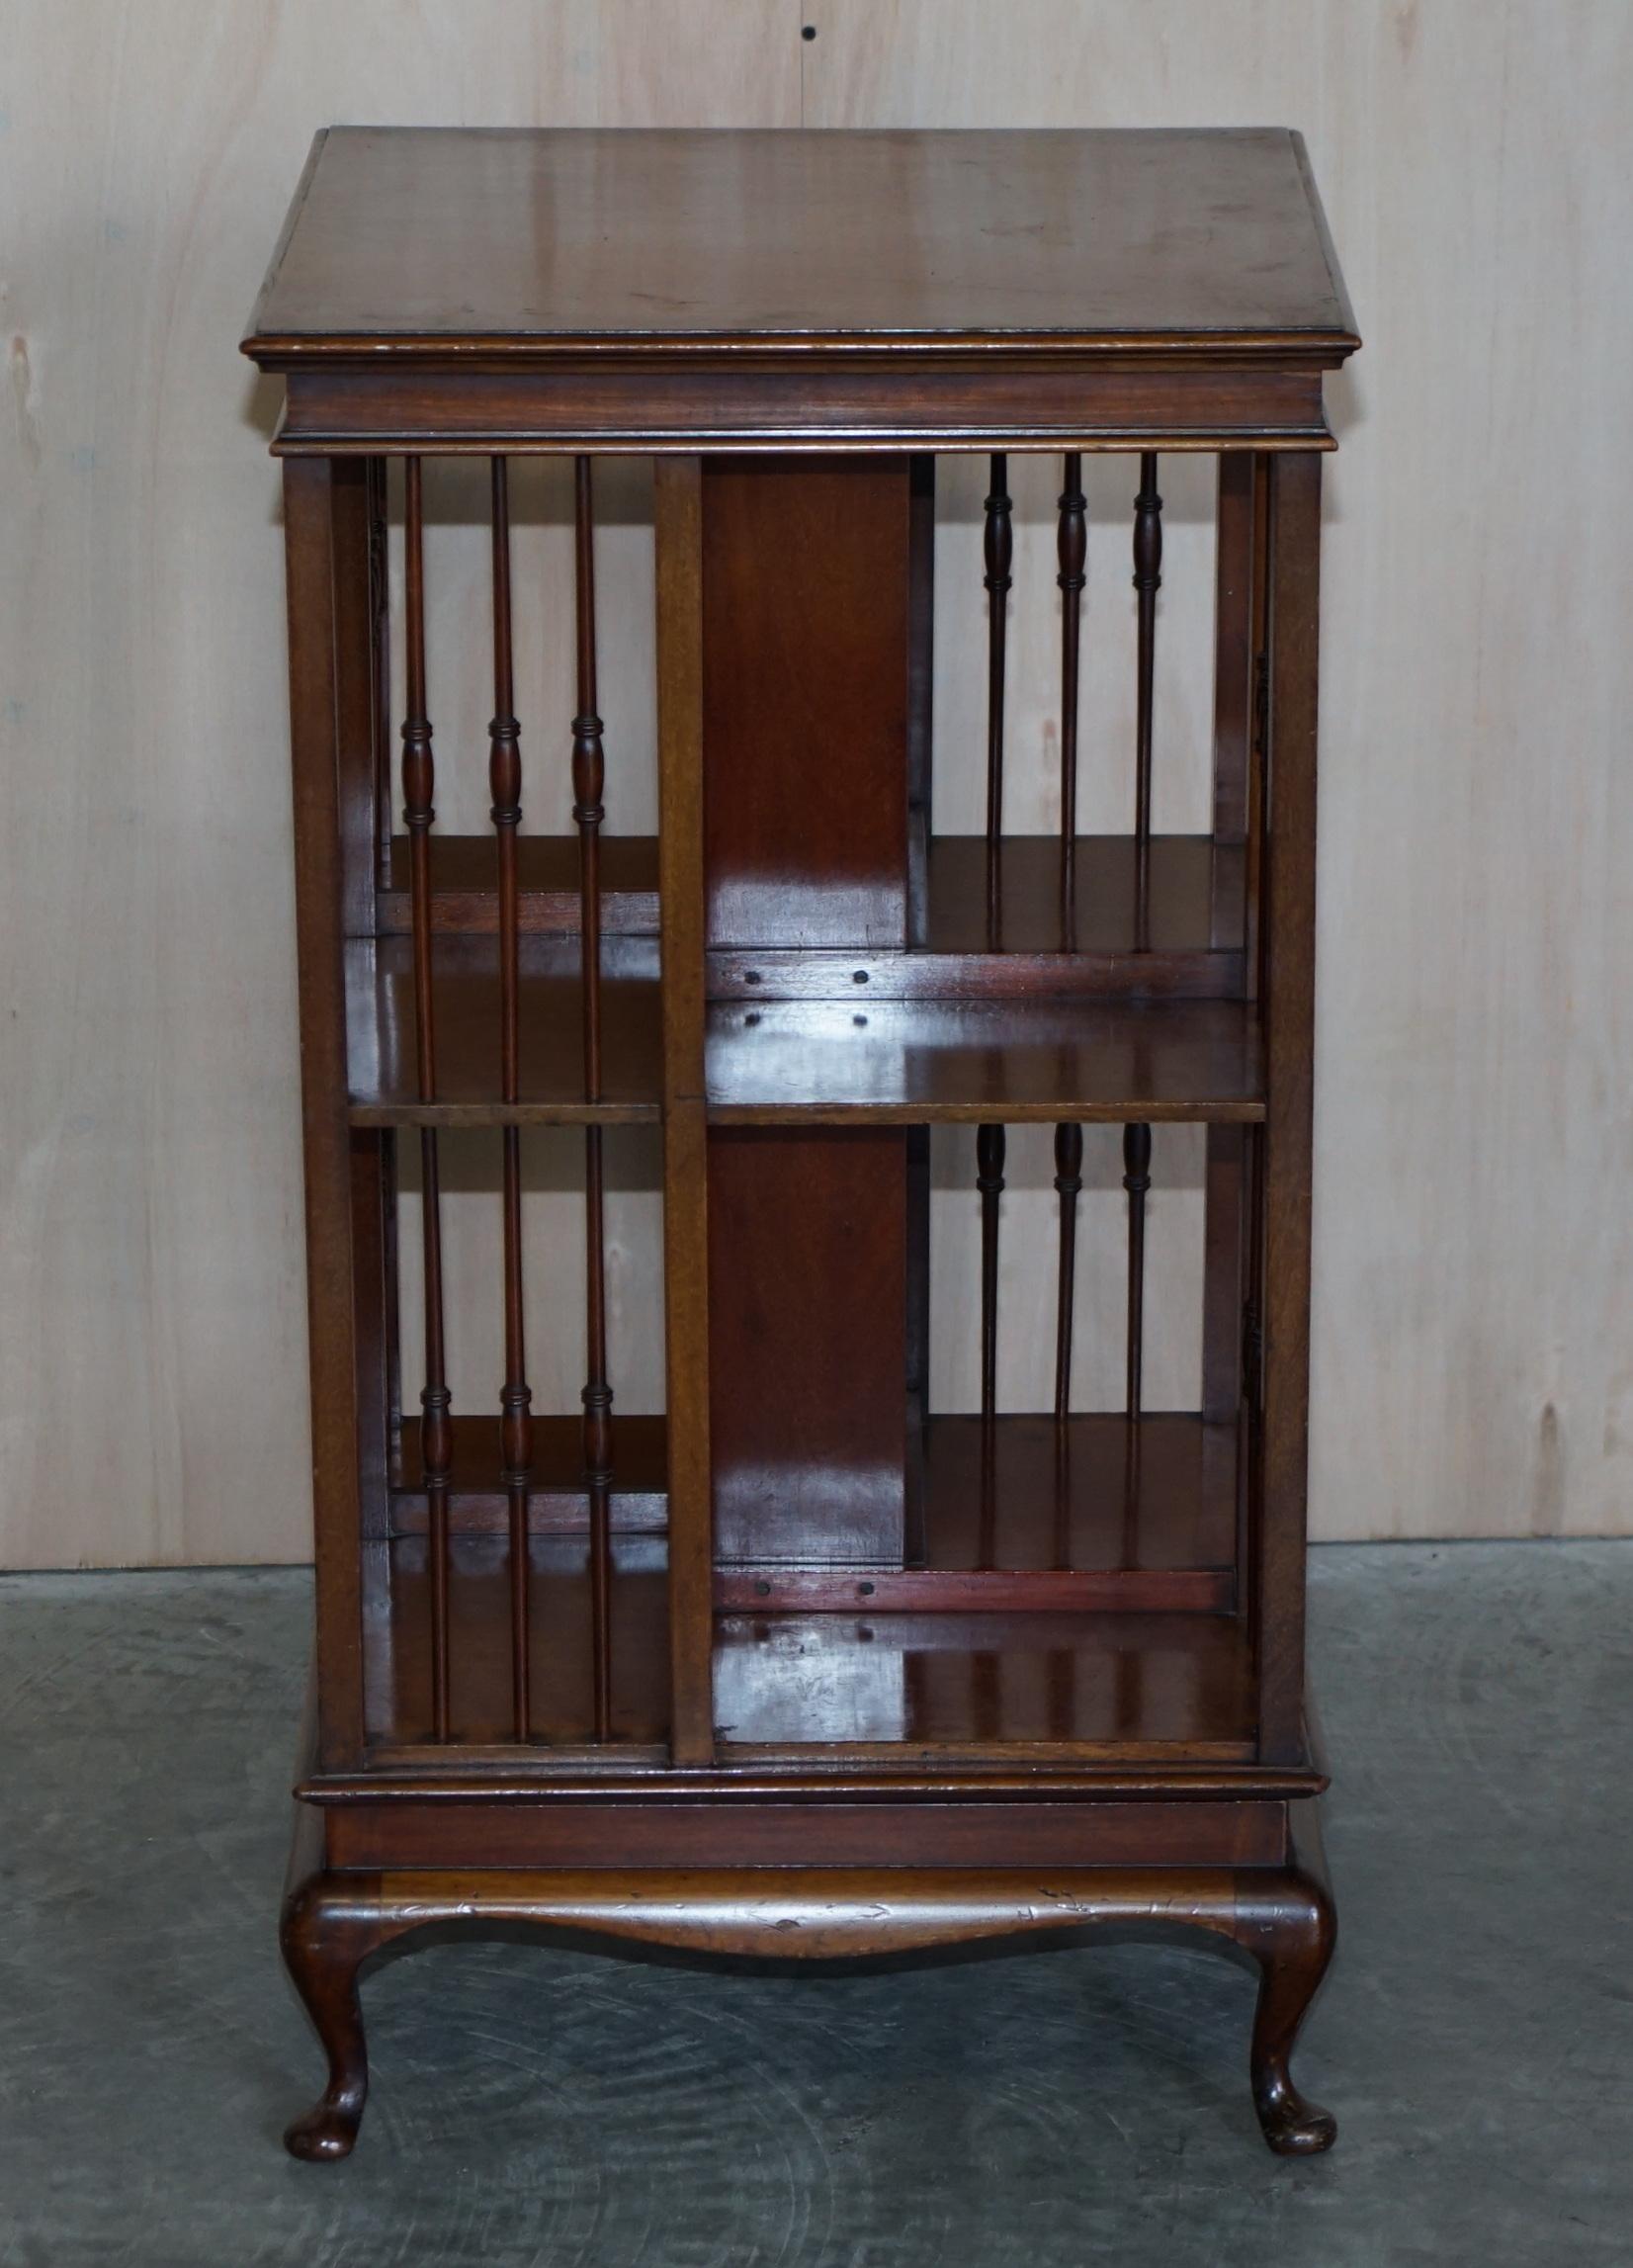 We are delighted to offer for sale this very well made English mahogany circa 1880-1900 revolving bookcase table with nicely carved cabriolet legs.

A good looking and well made piece, this is the first one I have seen with these types of